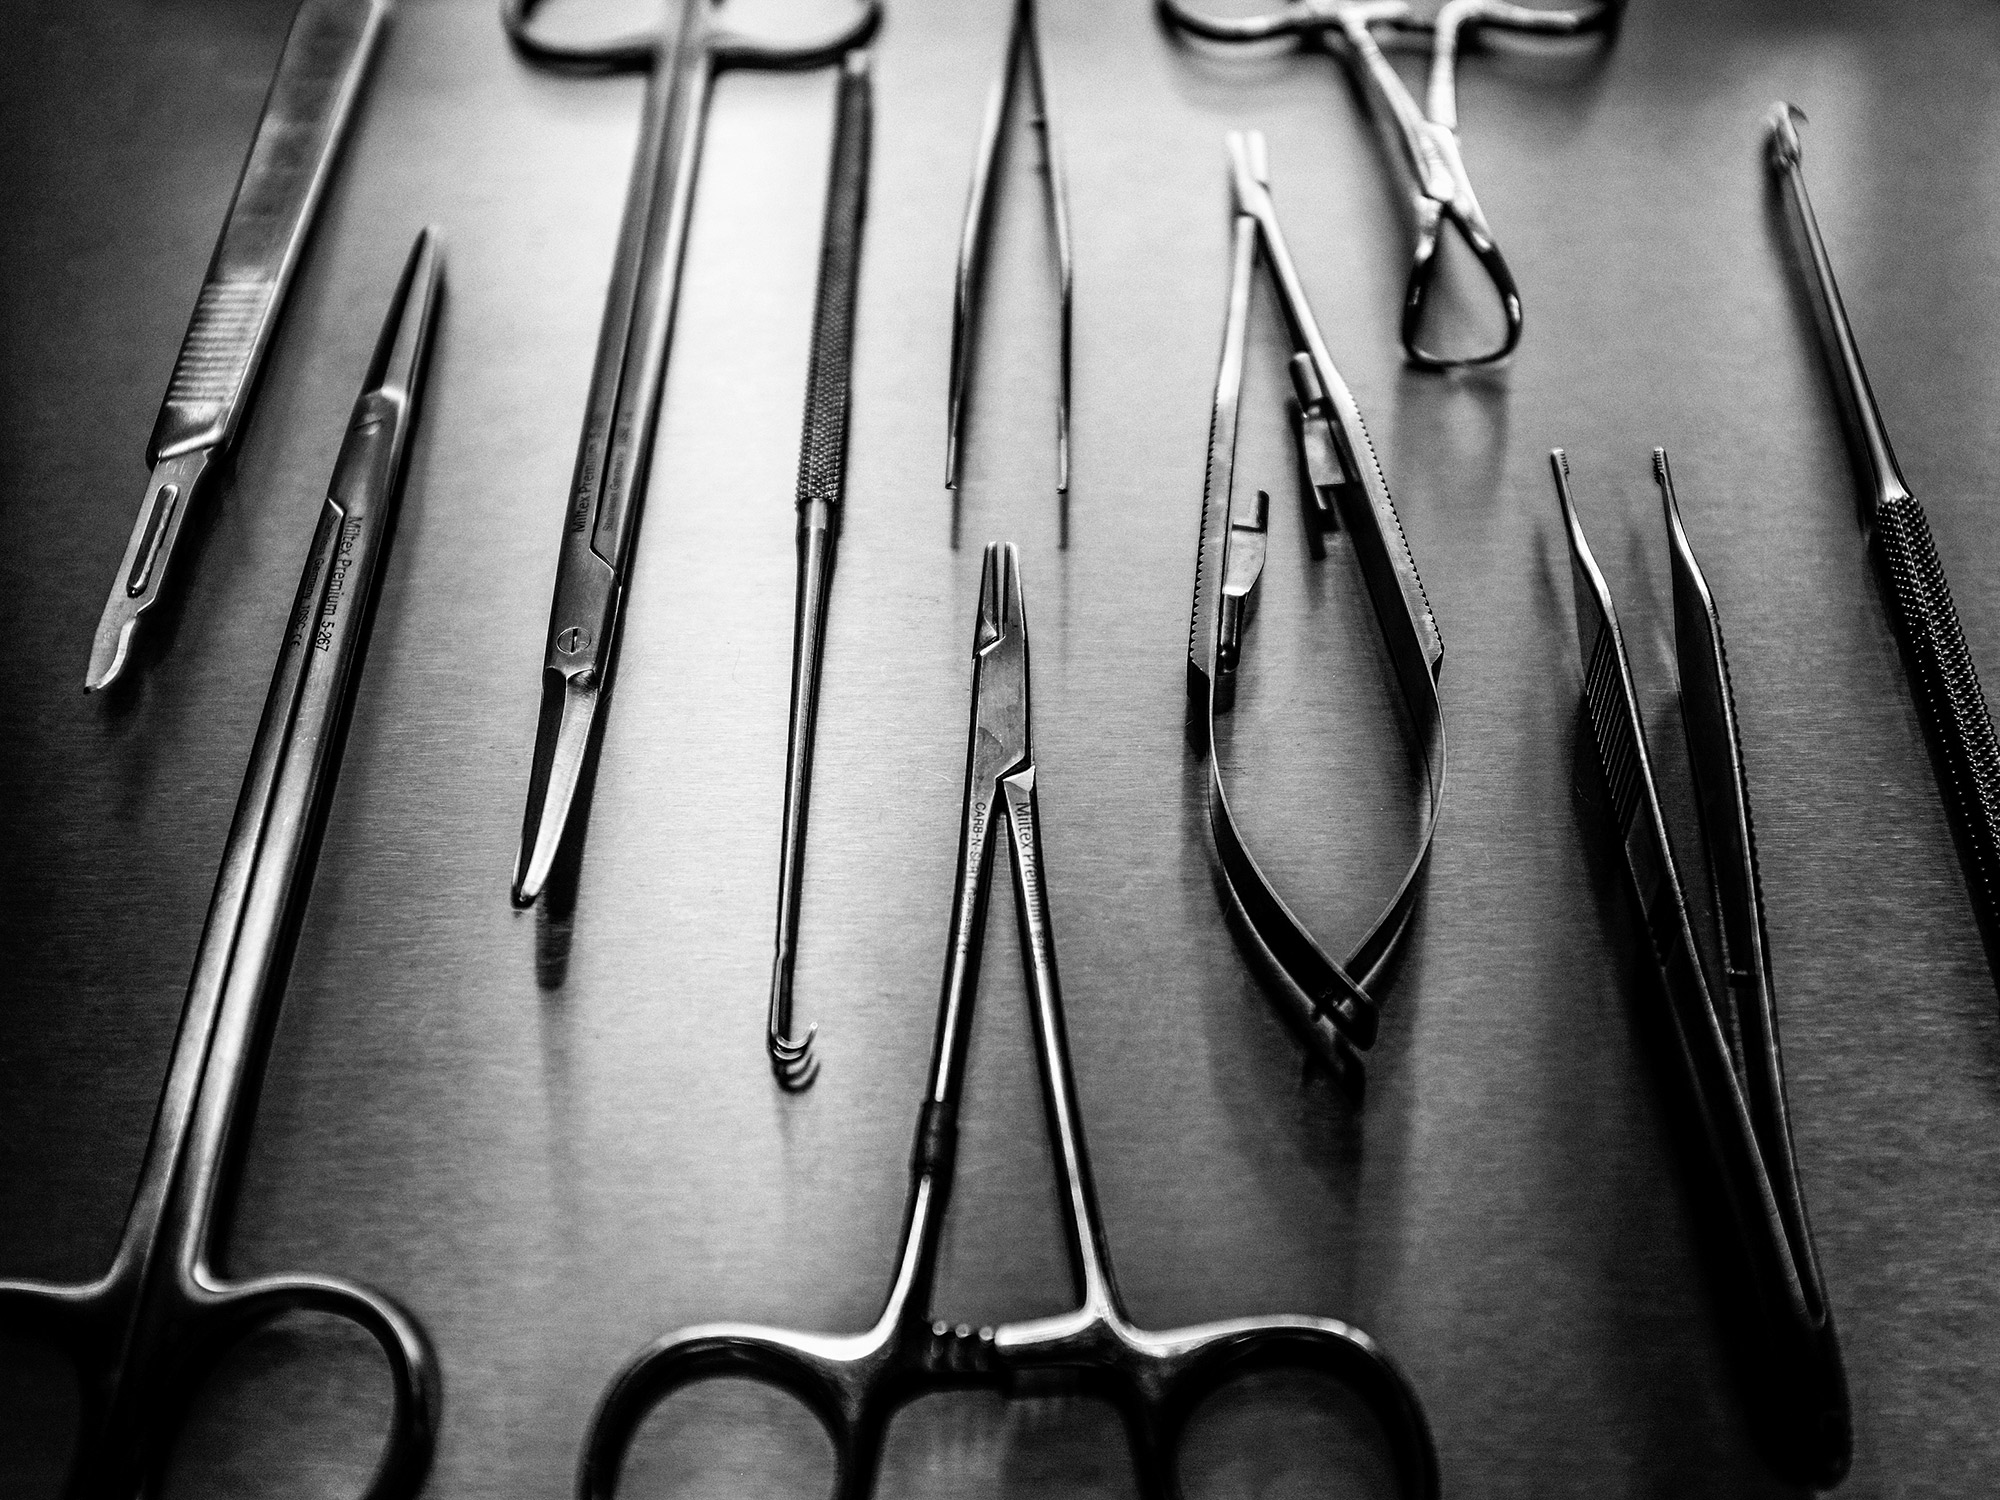 A set of surgical tools belonging to Dr. Kevin Smith of Houston, photographed by Houston corporate photographer, Todd Spoth.